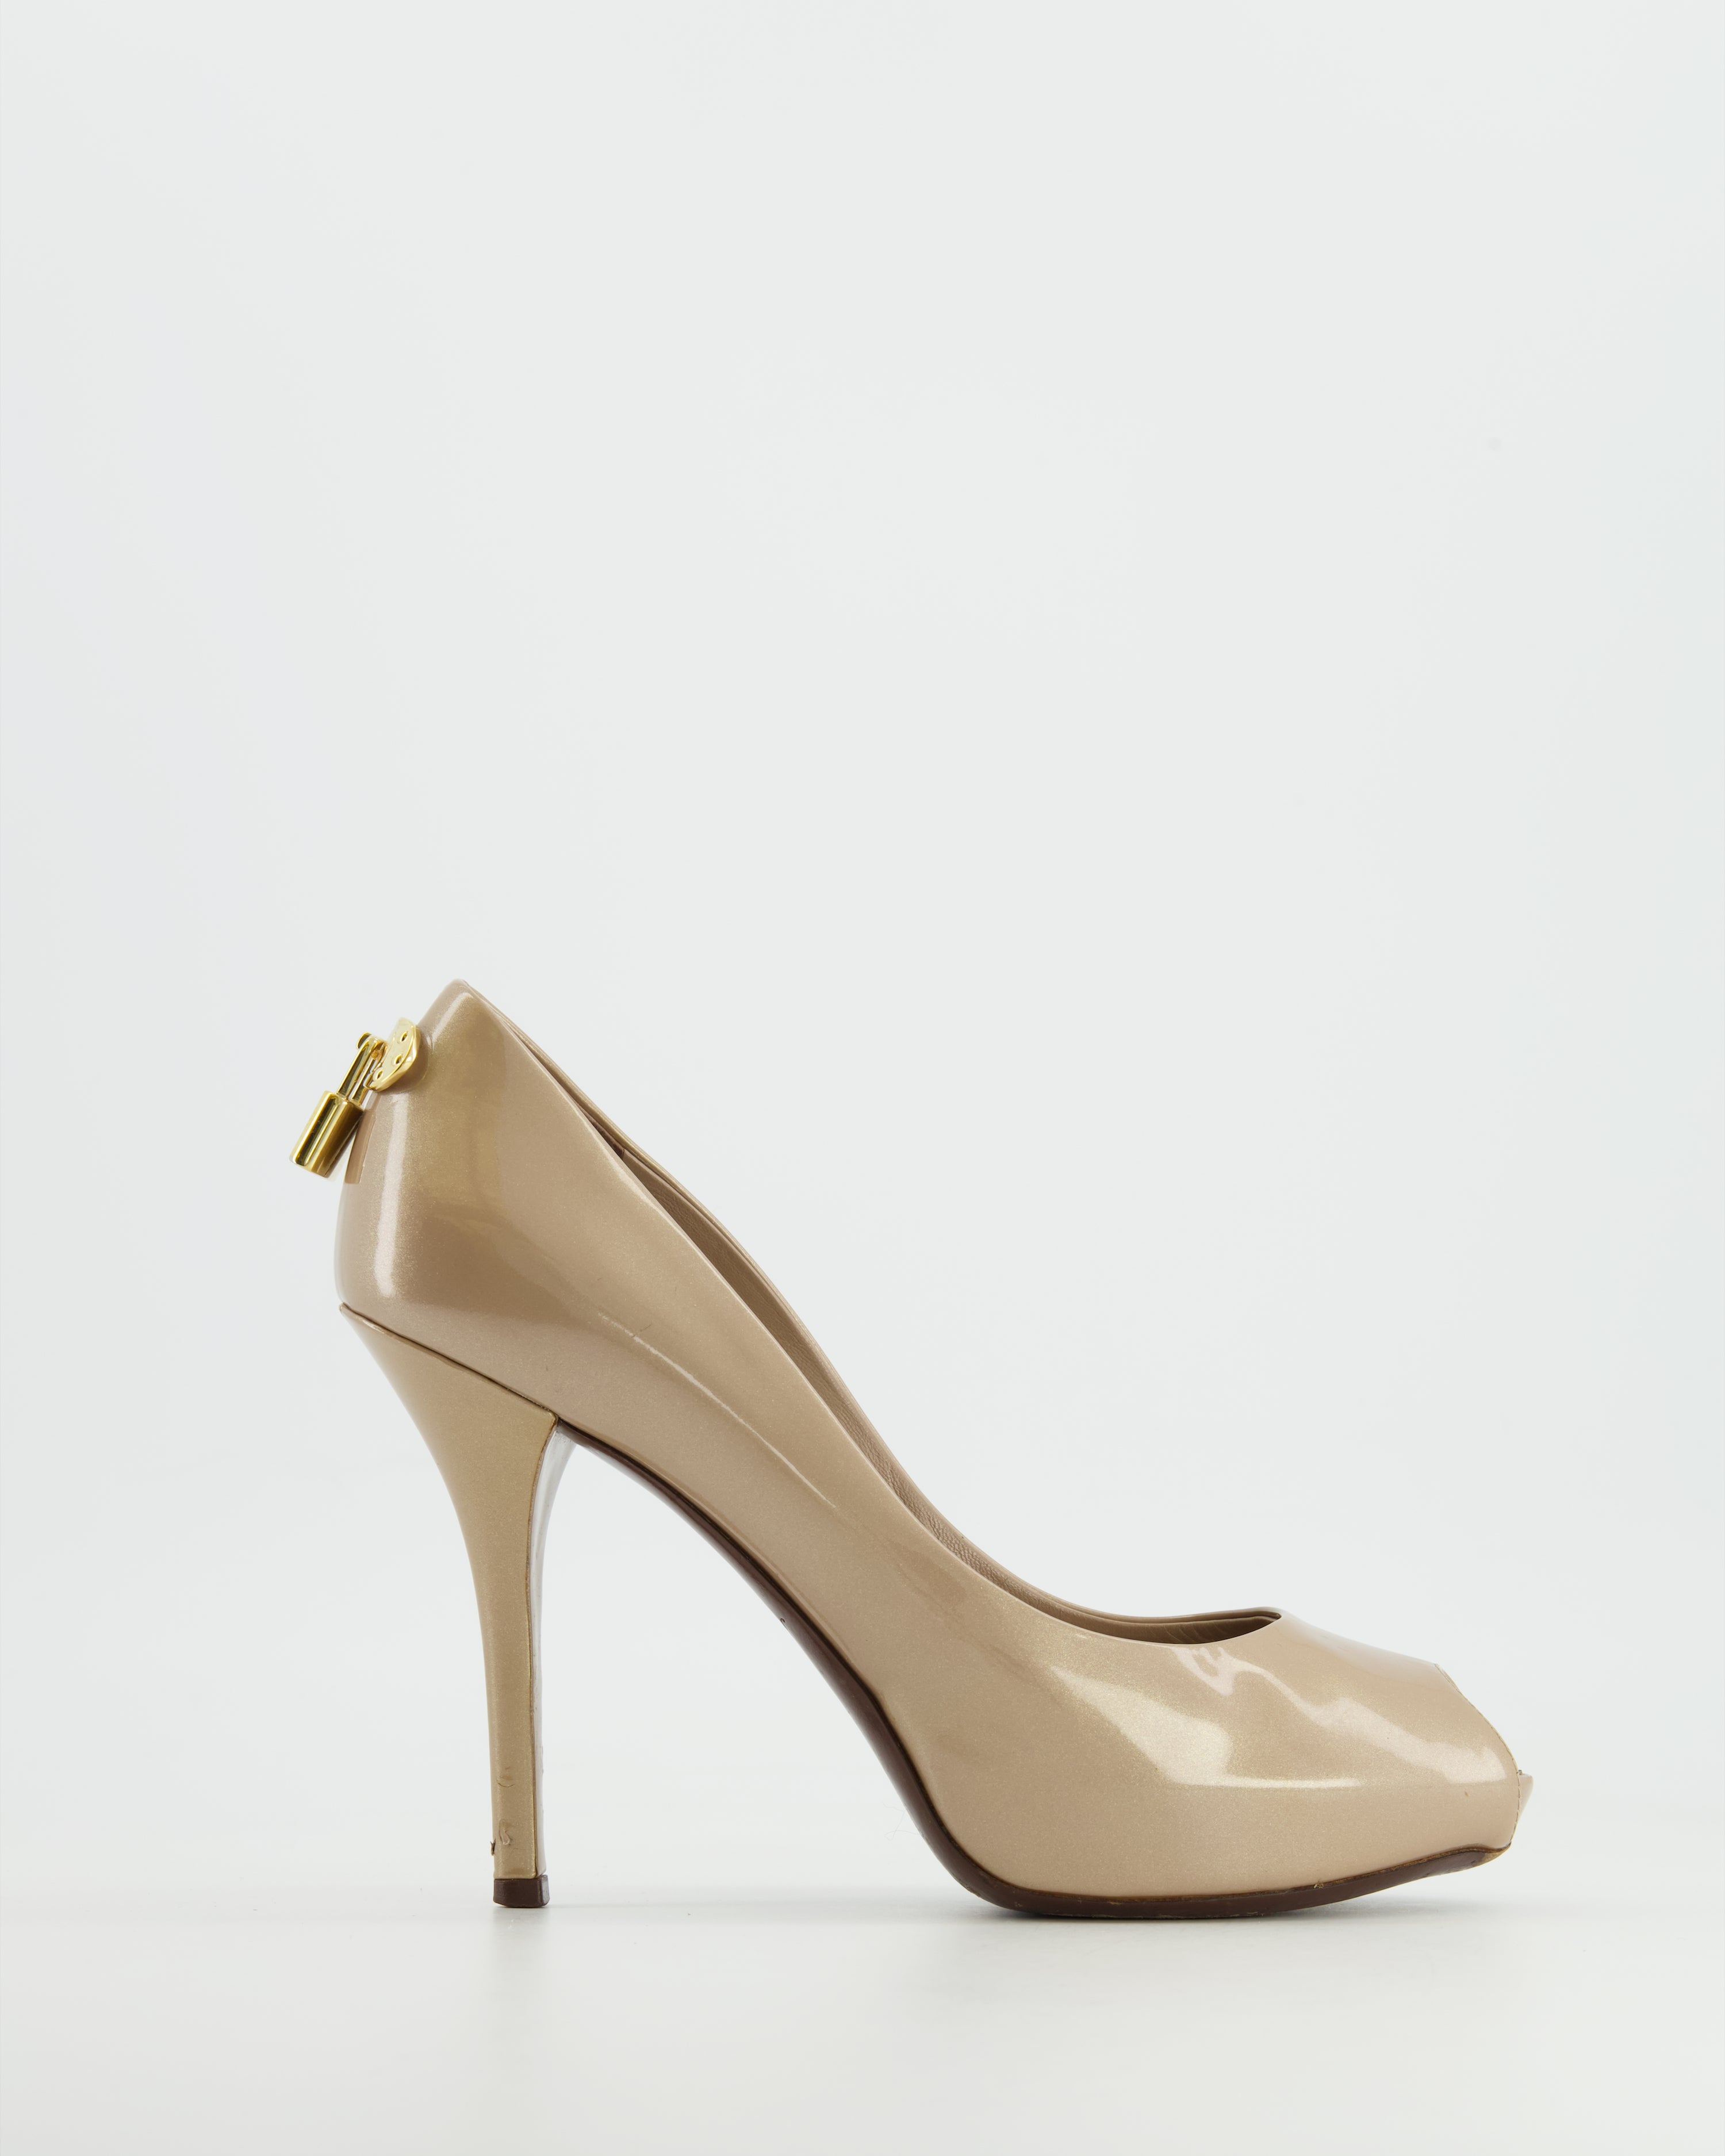 LOUIS VUITTON #39108 Cream Leather Heels (US 7 EU 37) – ALL YOUR BLISS